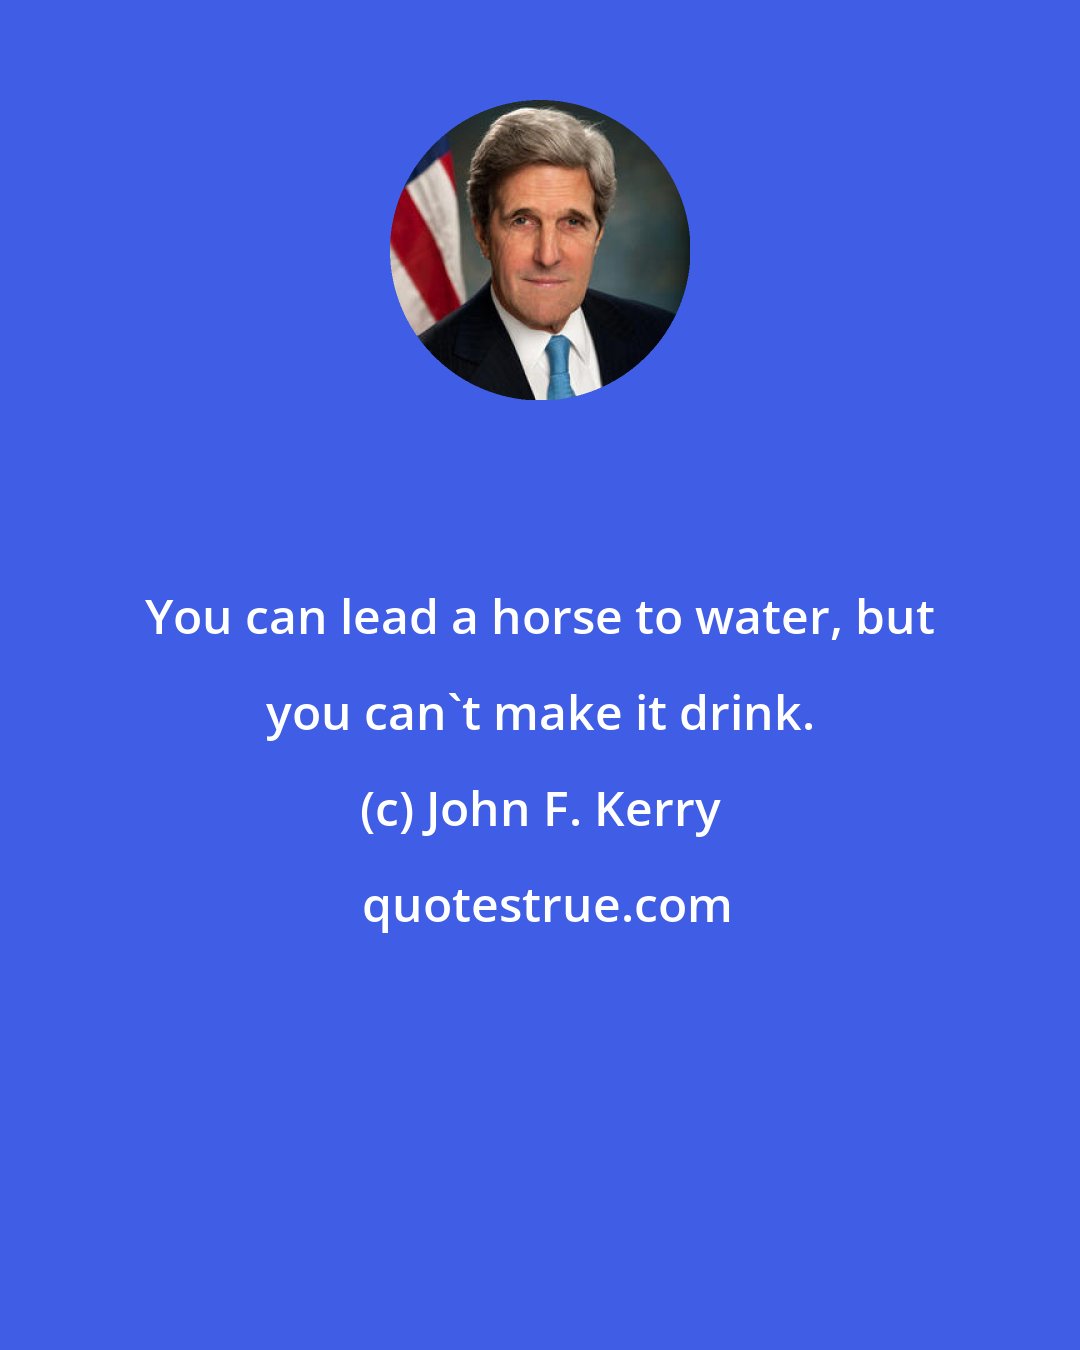 John F. Kerry: You can lead a horse to water, but you can't make it drink.